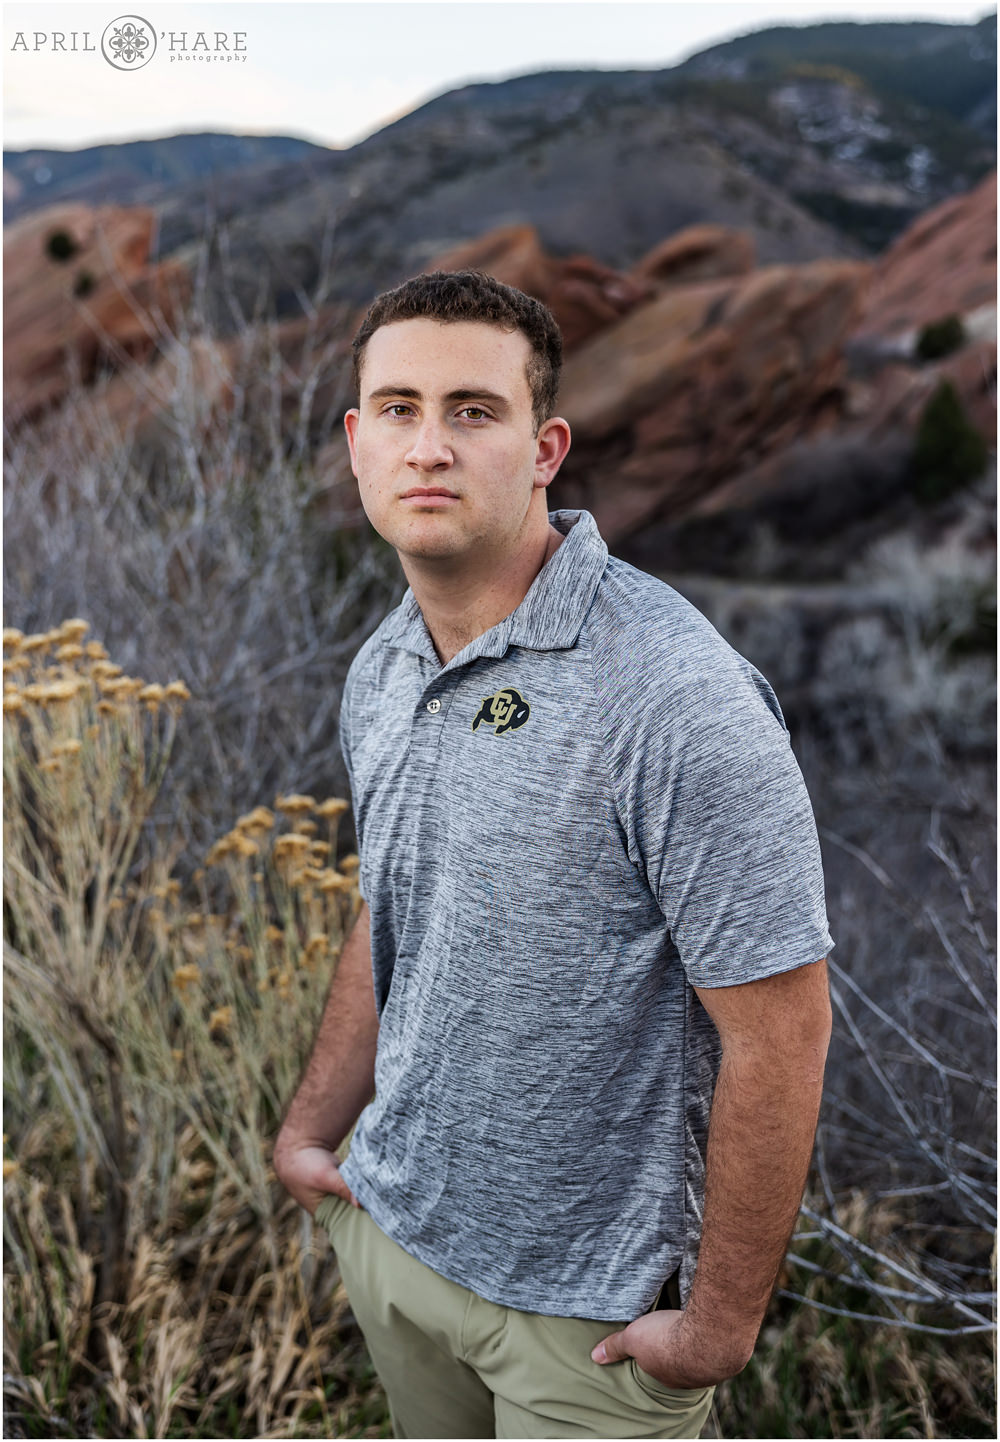 Young man about to graduate from high school wears a CU Boulder shirt for his senior picture at Red Rocks